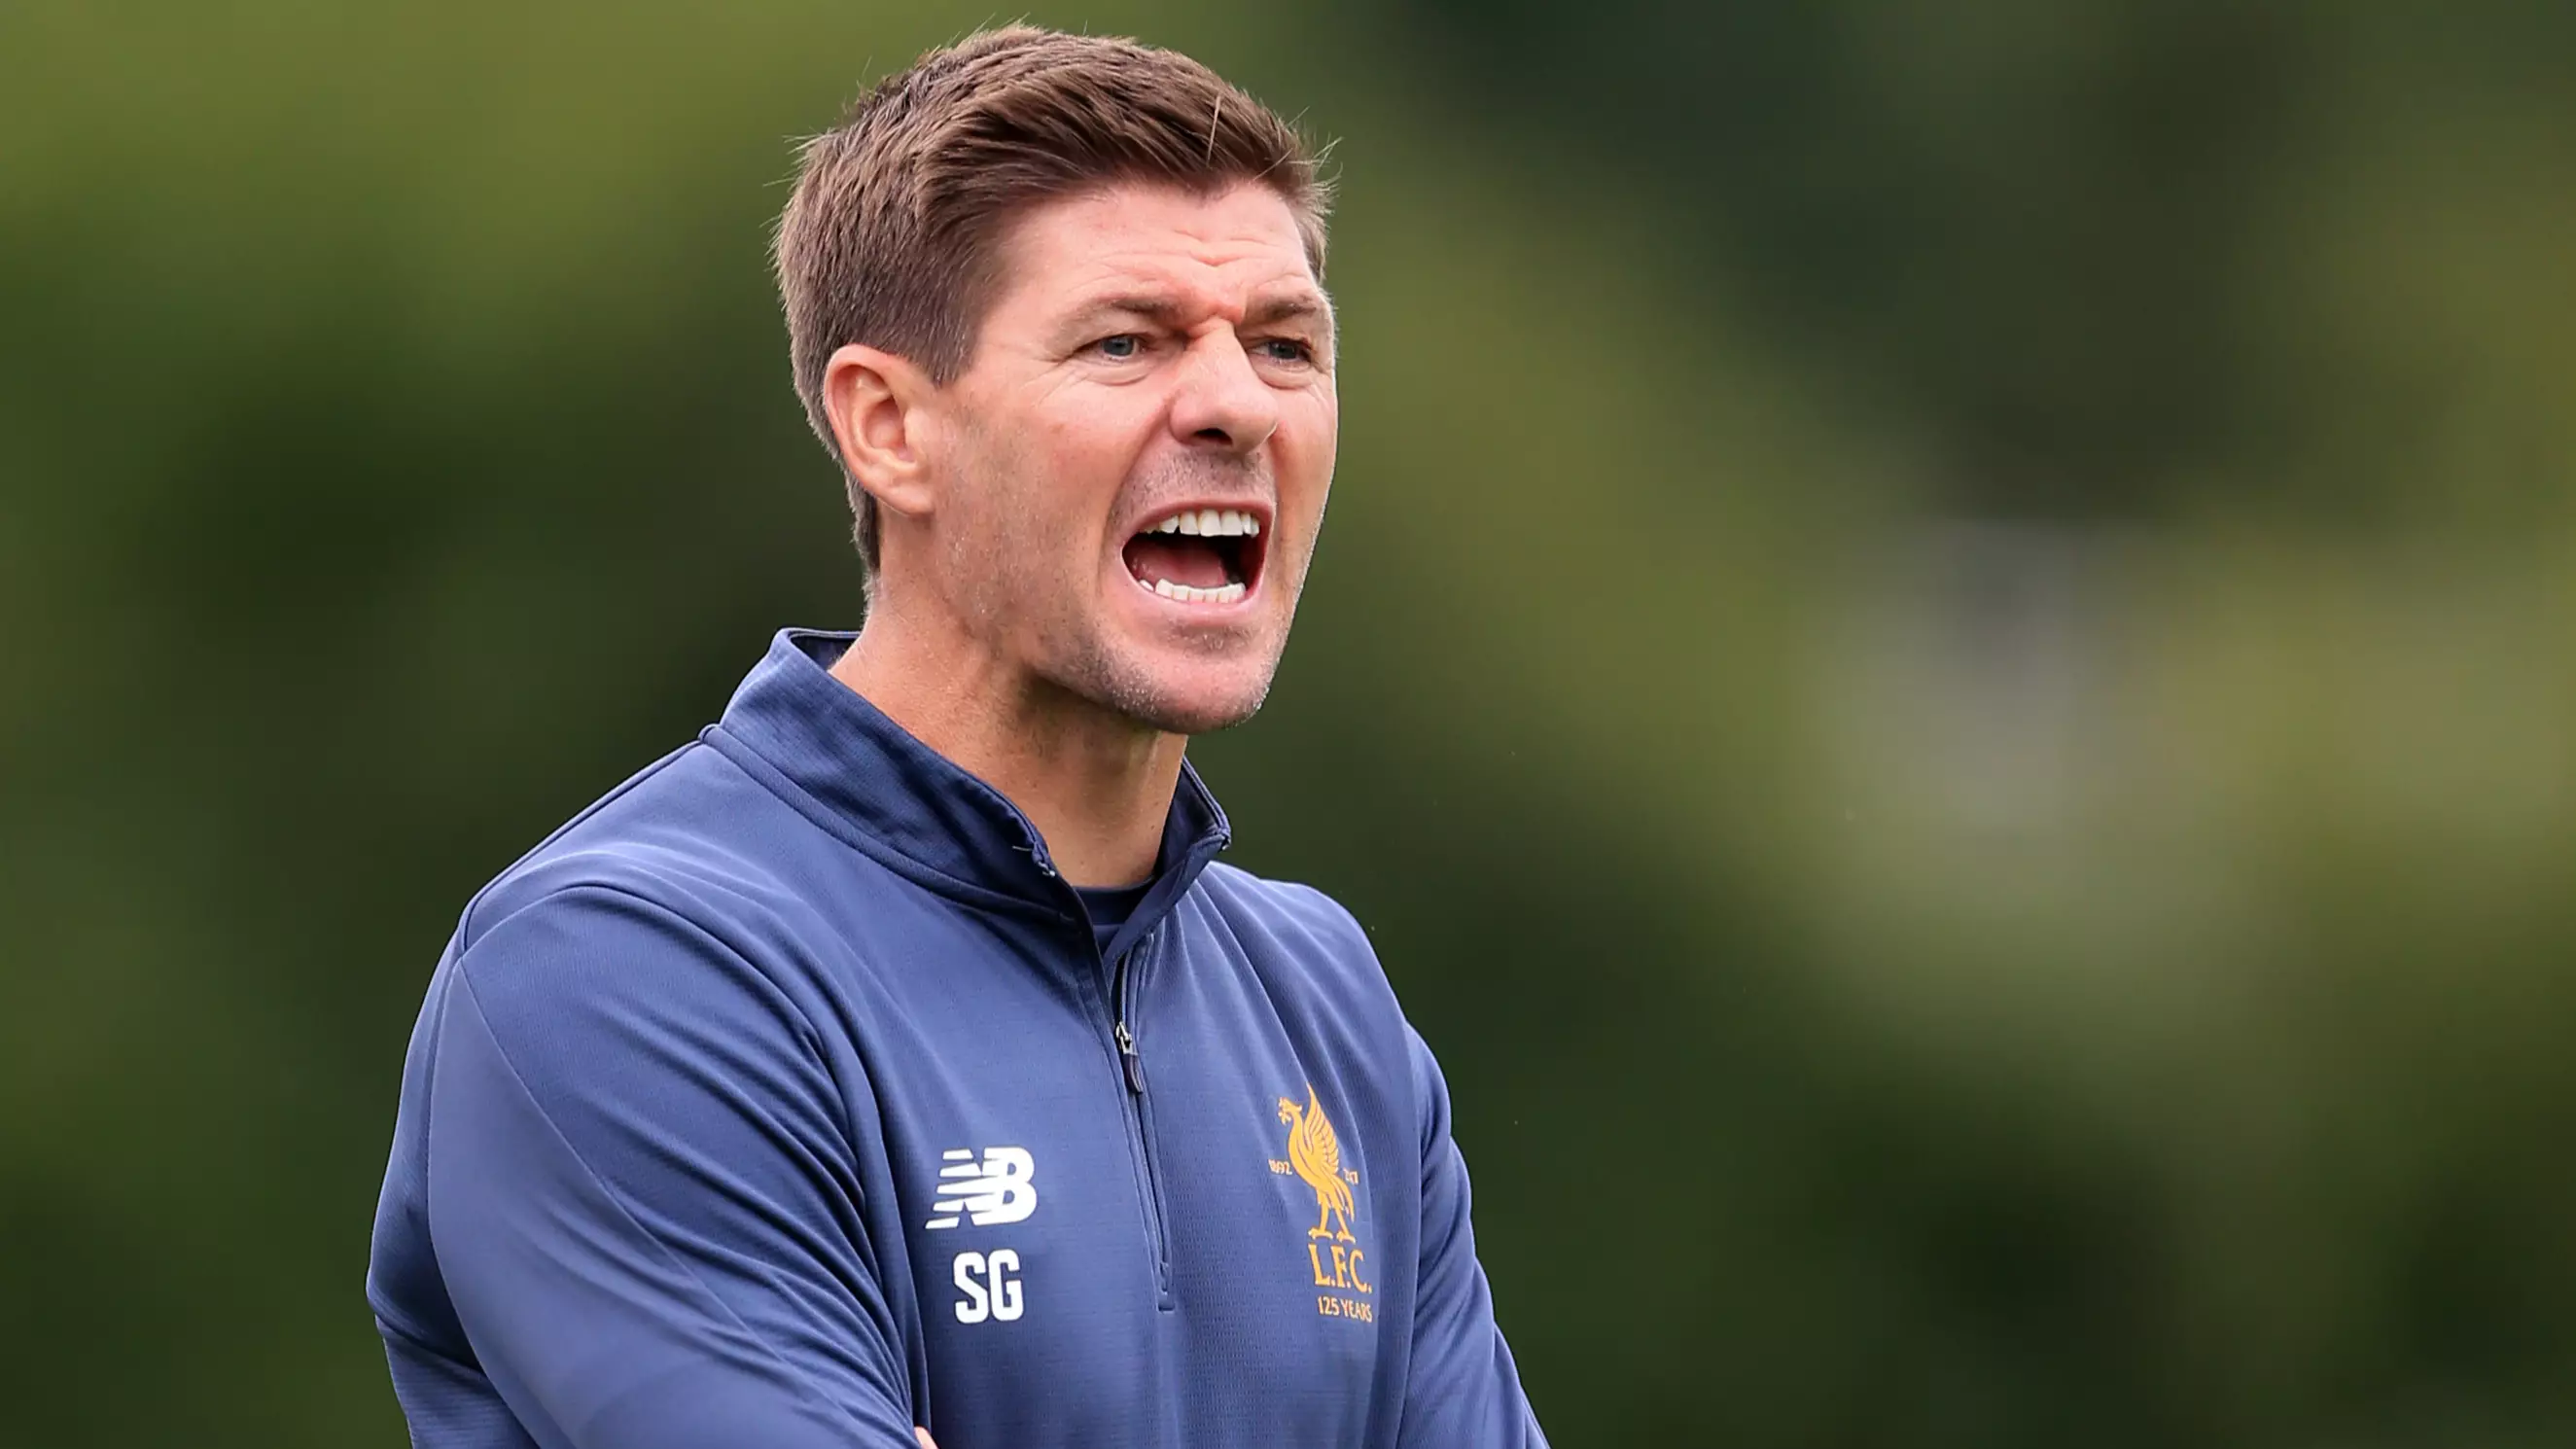 Steven Gerrard's Brilliant Response When Asked If Rangers Can Win The League This Season